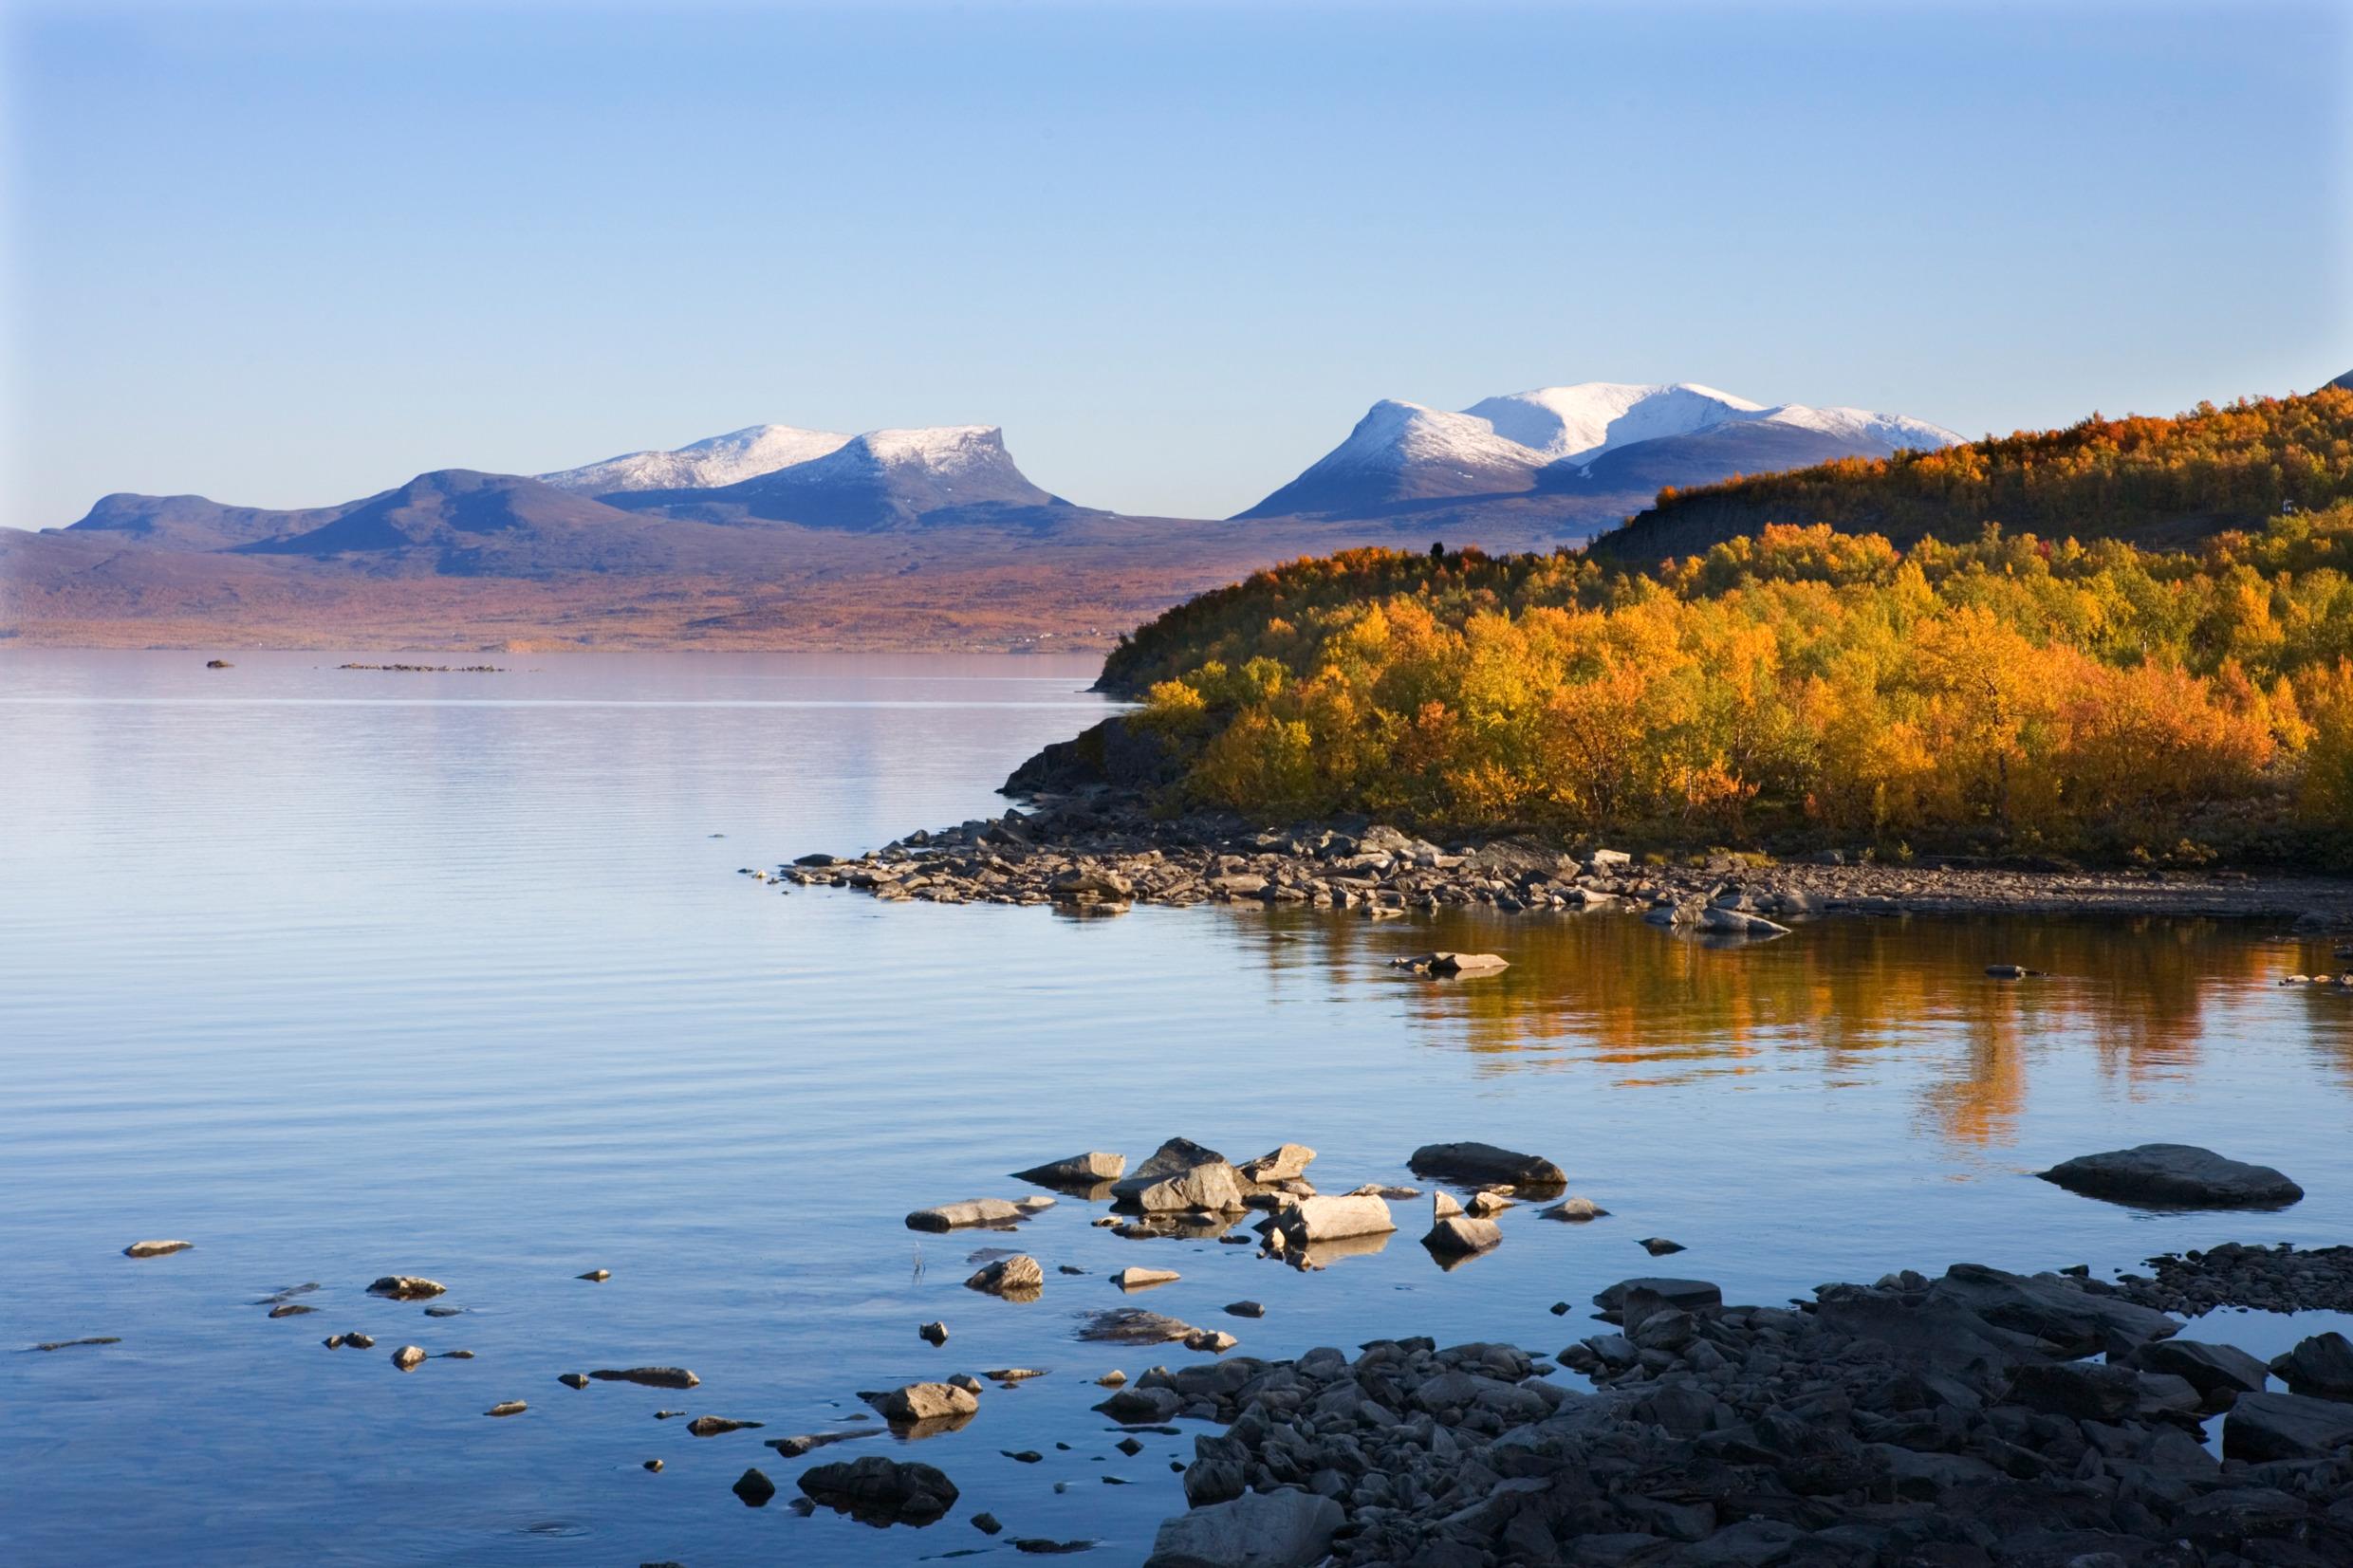 A lake in Abisko with a rocky shoreline and trees in autumn colours, with mountains in the background.